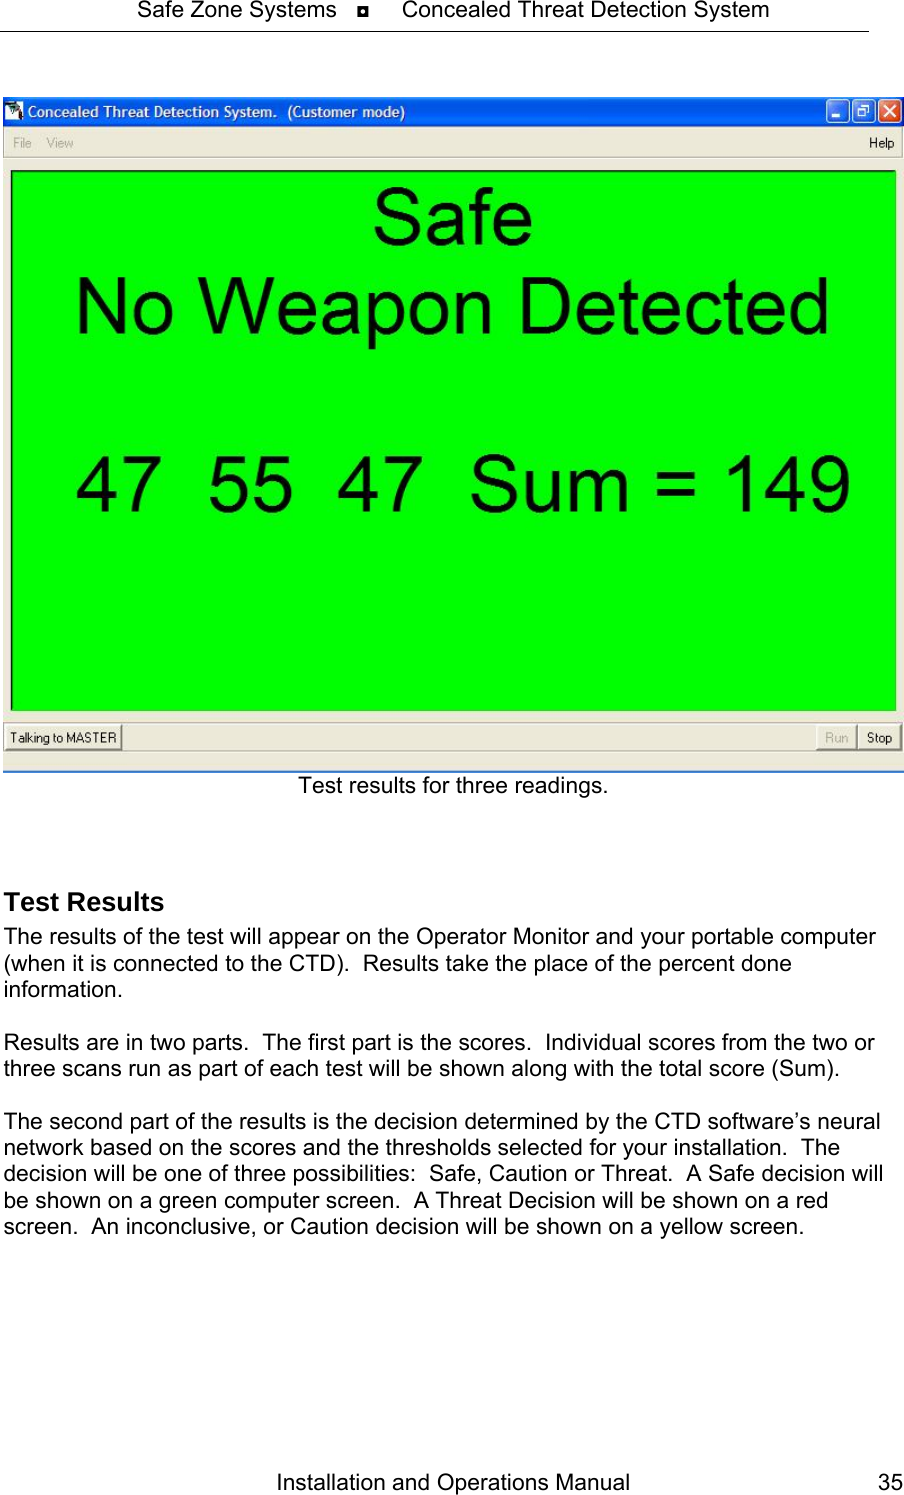 Safe Zone Systems   ◘     Concealed Threat Detection System   Test results for three readings.  Test Results The results of the test will appear on the Operator Monitor and your portable computer (when it is connected to the CTD).  Results take the place of the percent done information.  Results are in two parts.  The first part is the scores.  Individual scores from the two or three scans run as part of each test will be shown along with the total score (Sum).  The second part of the results is the decision determined by the CTD software’s neural network based on the scores and the thresholds selected for your installation.  The decision will be one of three possibilities:  Safe, Caution or Threat.  A Safe decision will be shown on a green computer screen.  A Threat Decision will be shown on a red screen.  An inconclusive, or Caution decision will be shown on a yellow screen.  Installation and Operations Manual  35